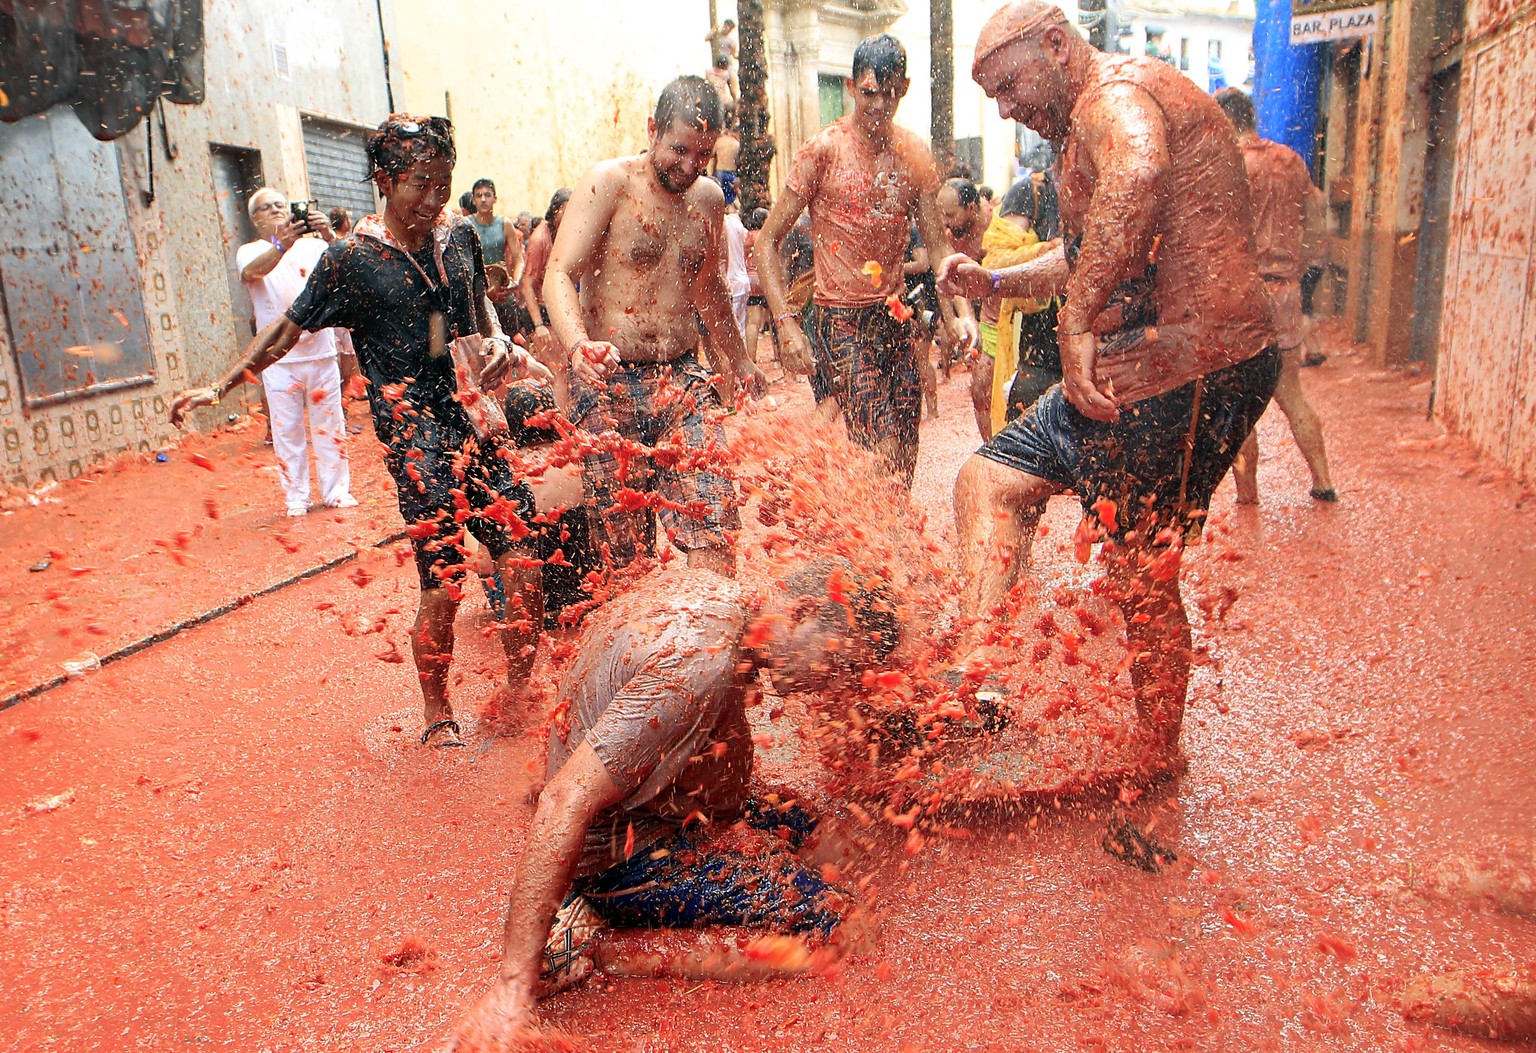 Revelers enjoy as they throw tomatoes at each other, during the annual &quot;Tomatina&quot;, tomato fight fiesta, in the village of Bunol, 50 kilometers outside Valencia, Spain, Wednesday, Aug. 30, 20 ...